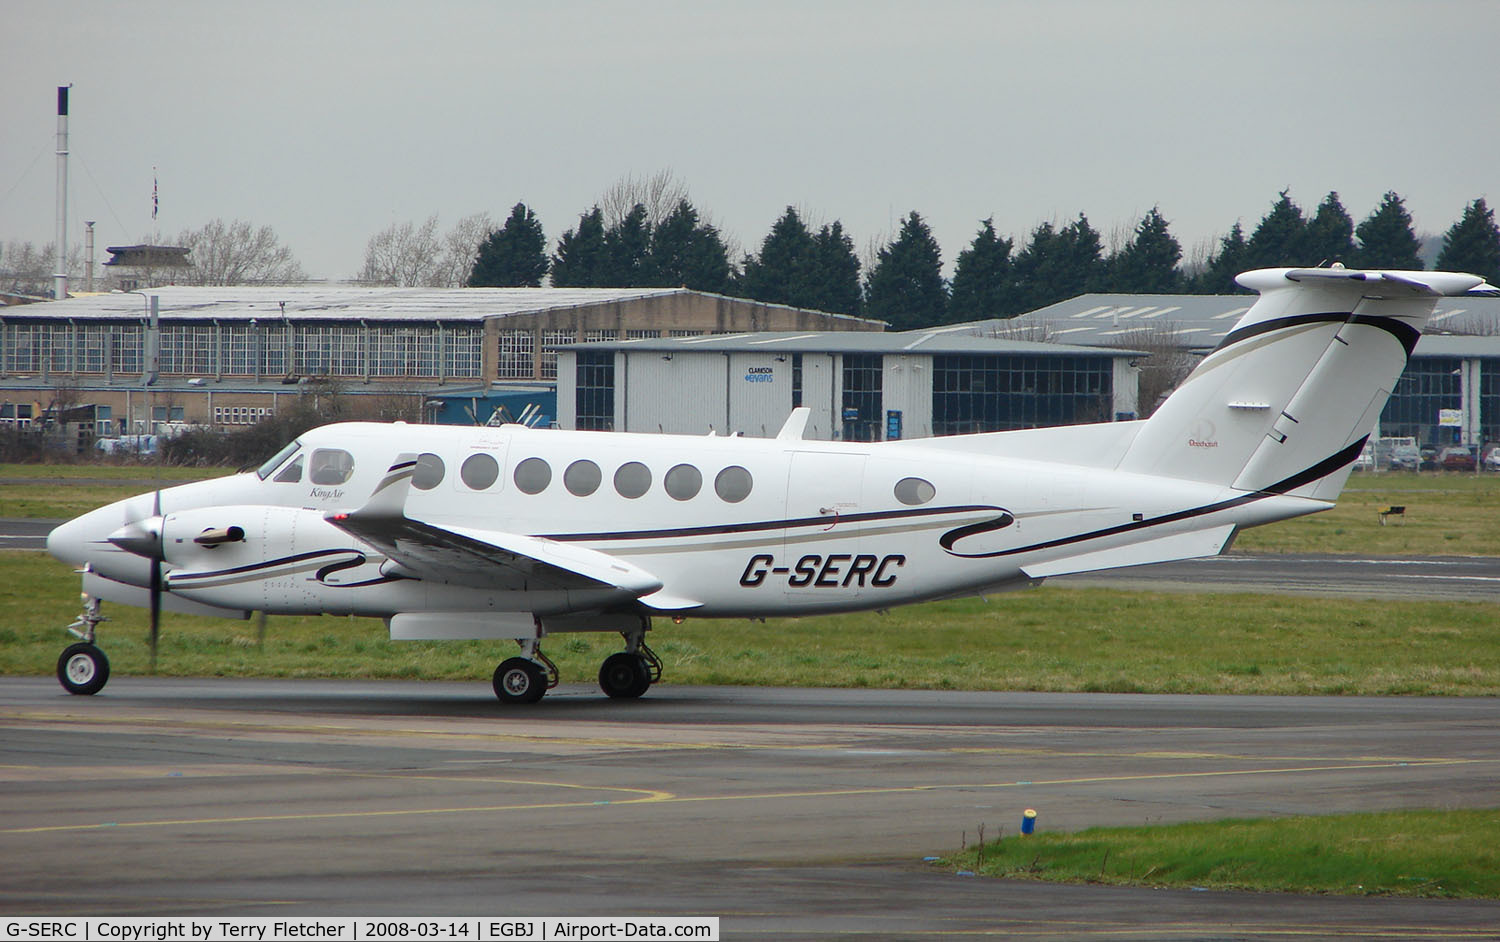 G-SERC, 2005 Beech Super King Air 350 C/N FL-438, A visitor to Gloucestershire Airport on the day of the horse racing Gold Cup  at the nearby Cheltenham Racecourse